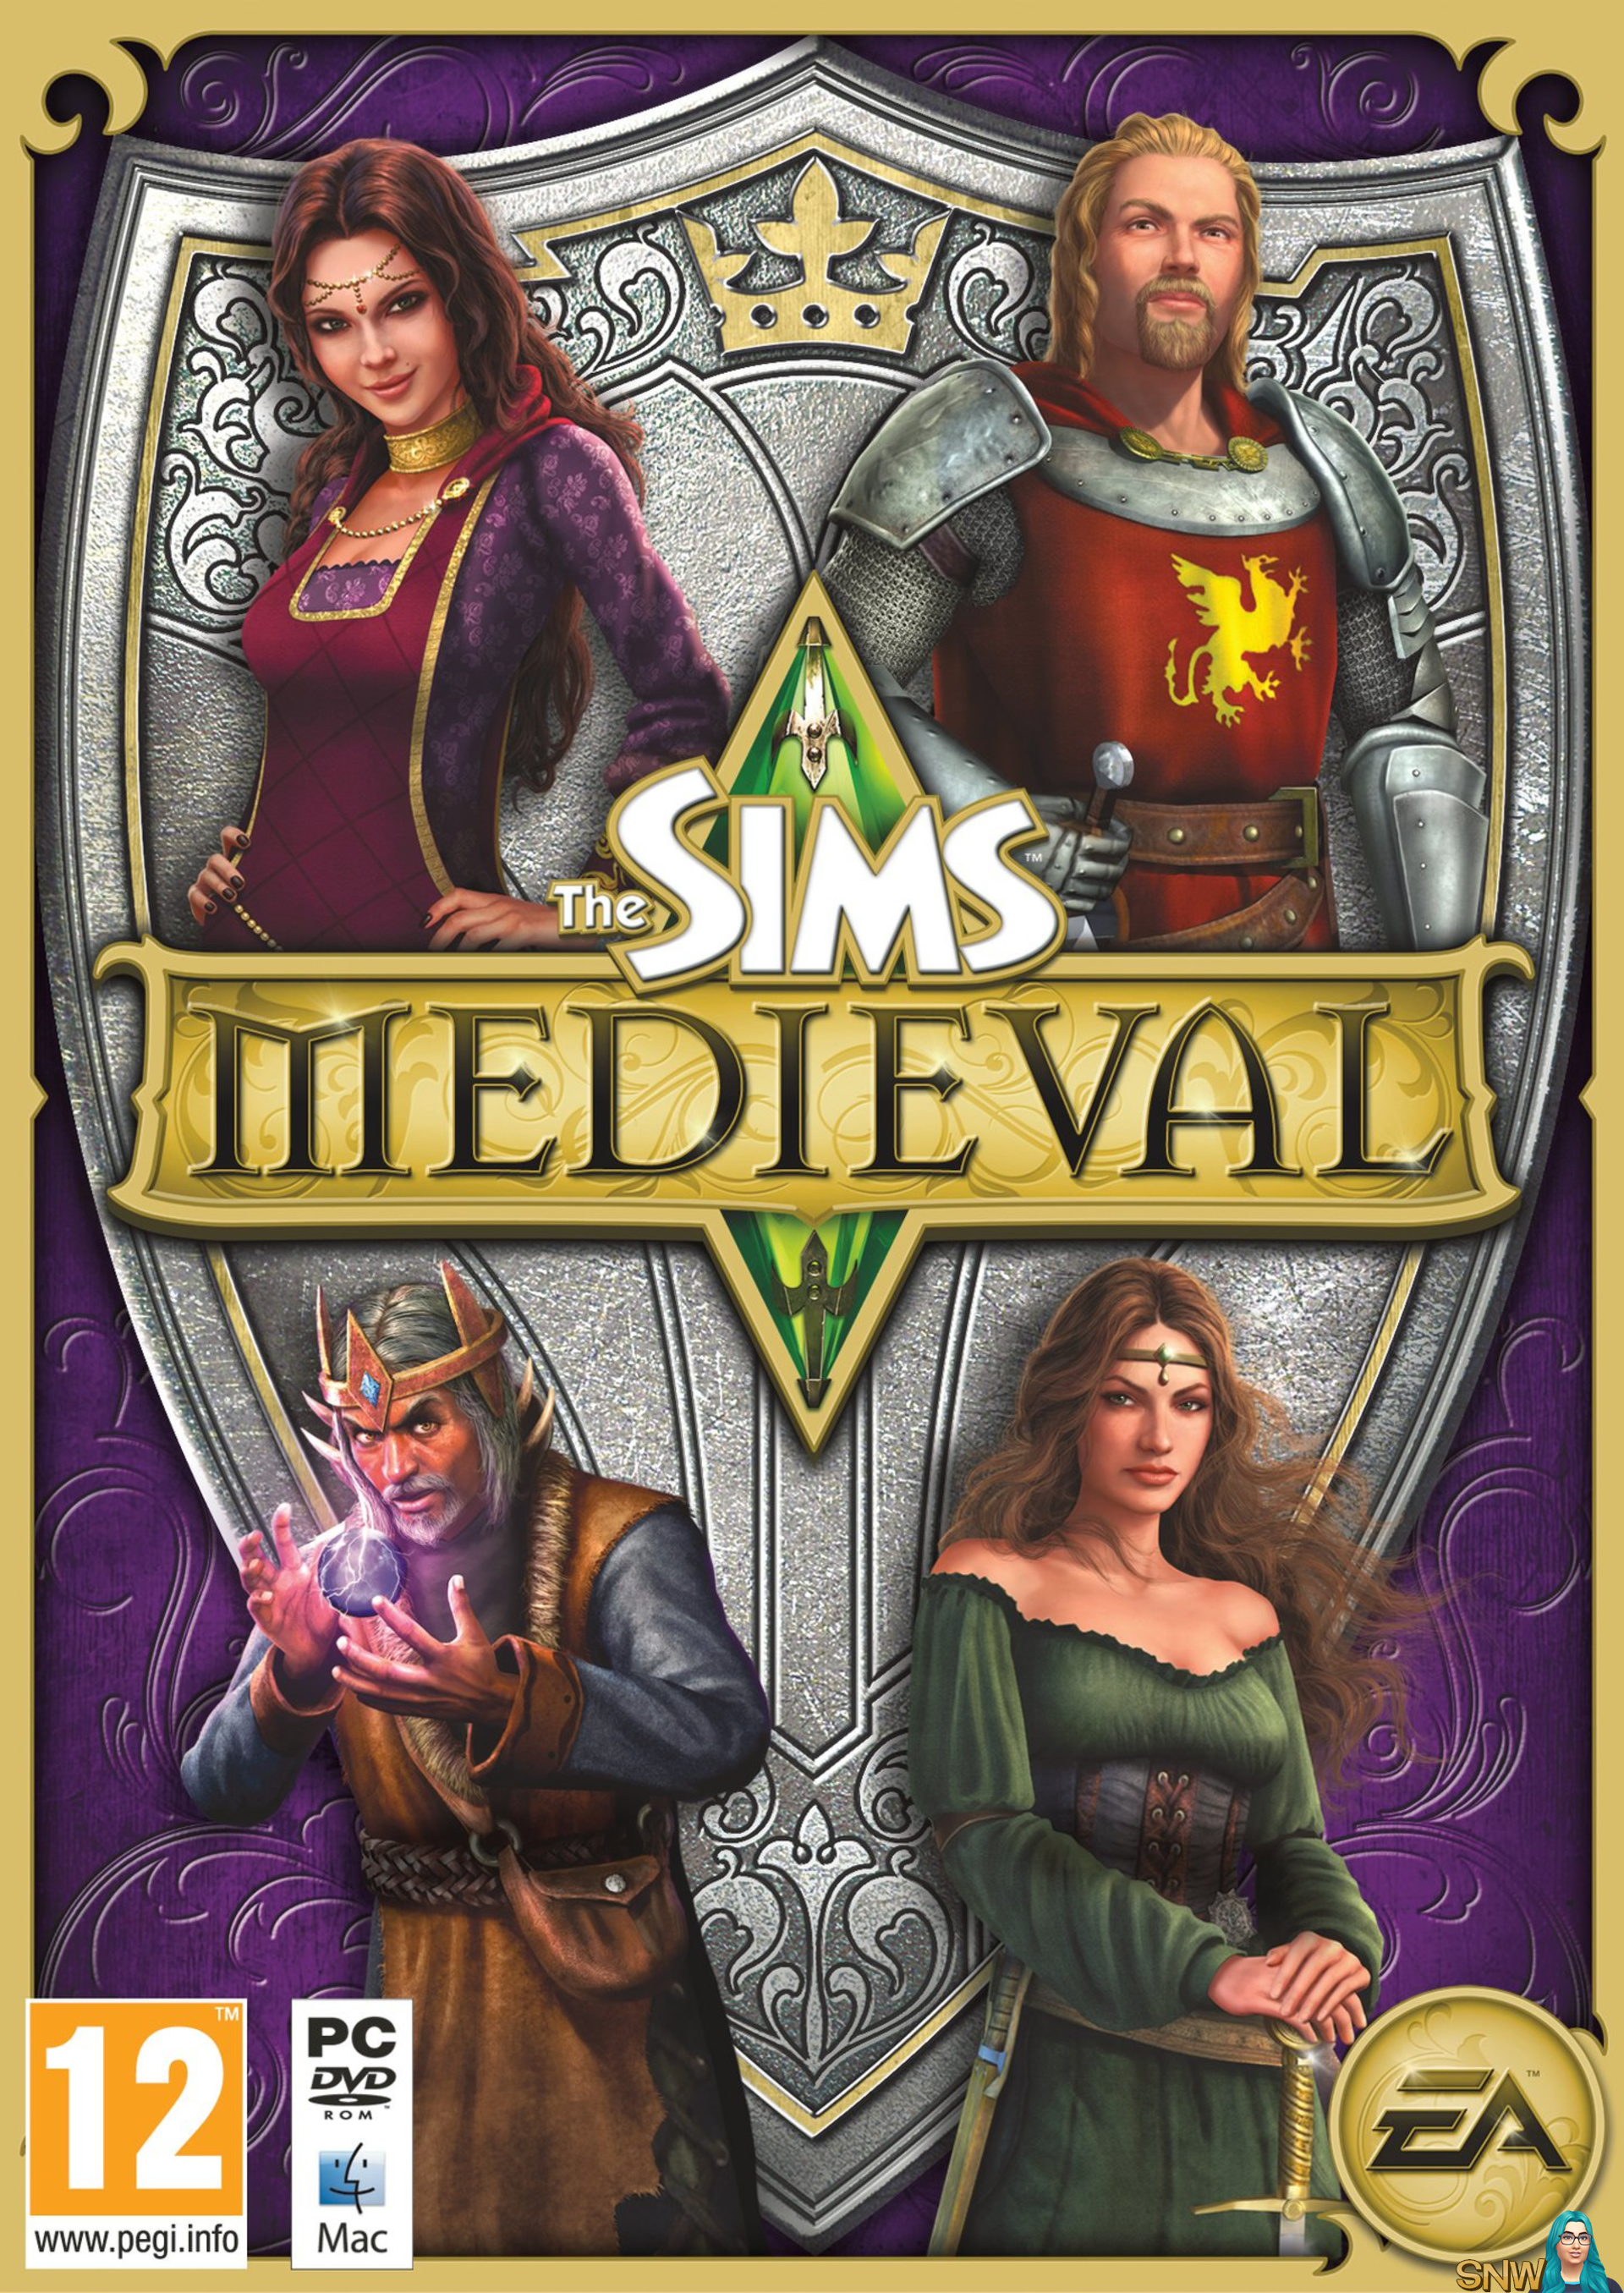 is the sims medieval an expansion pack